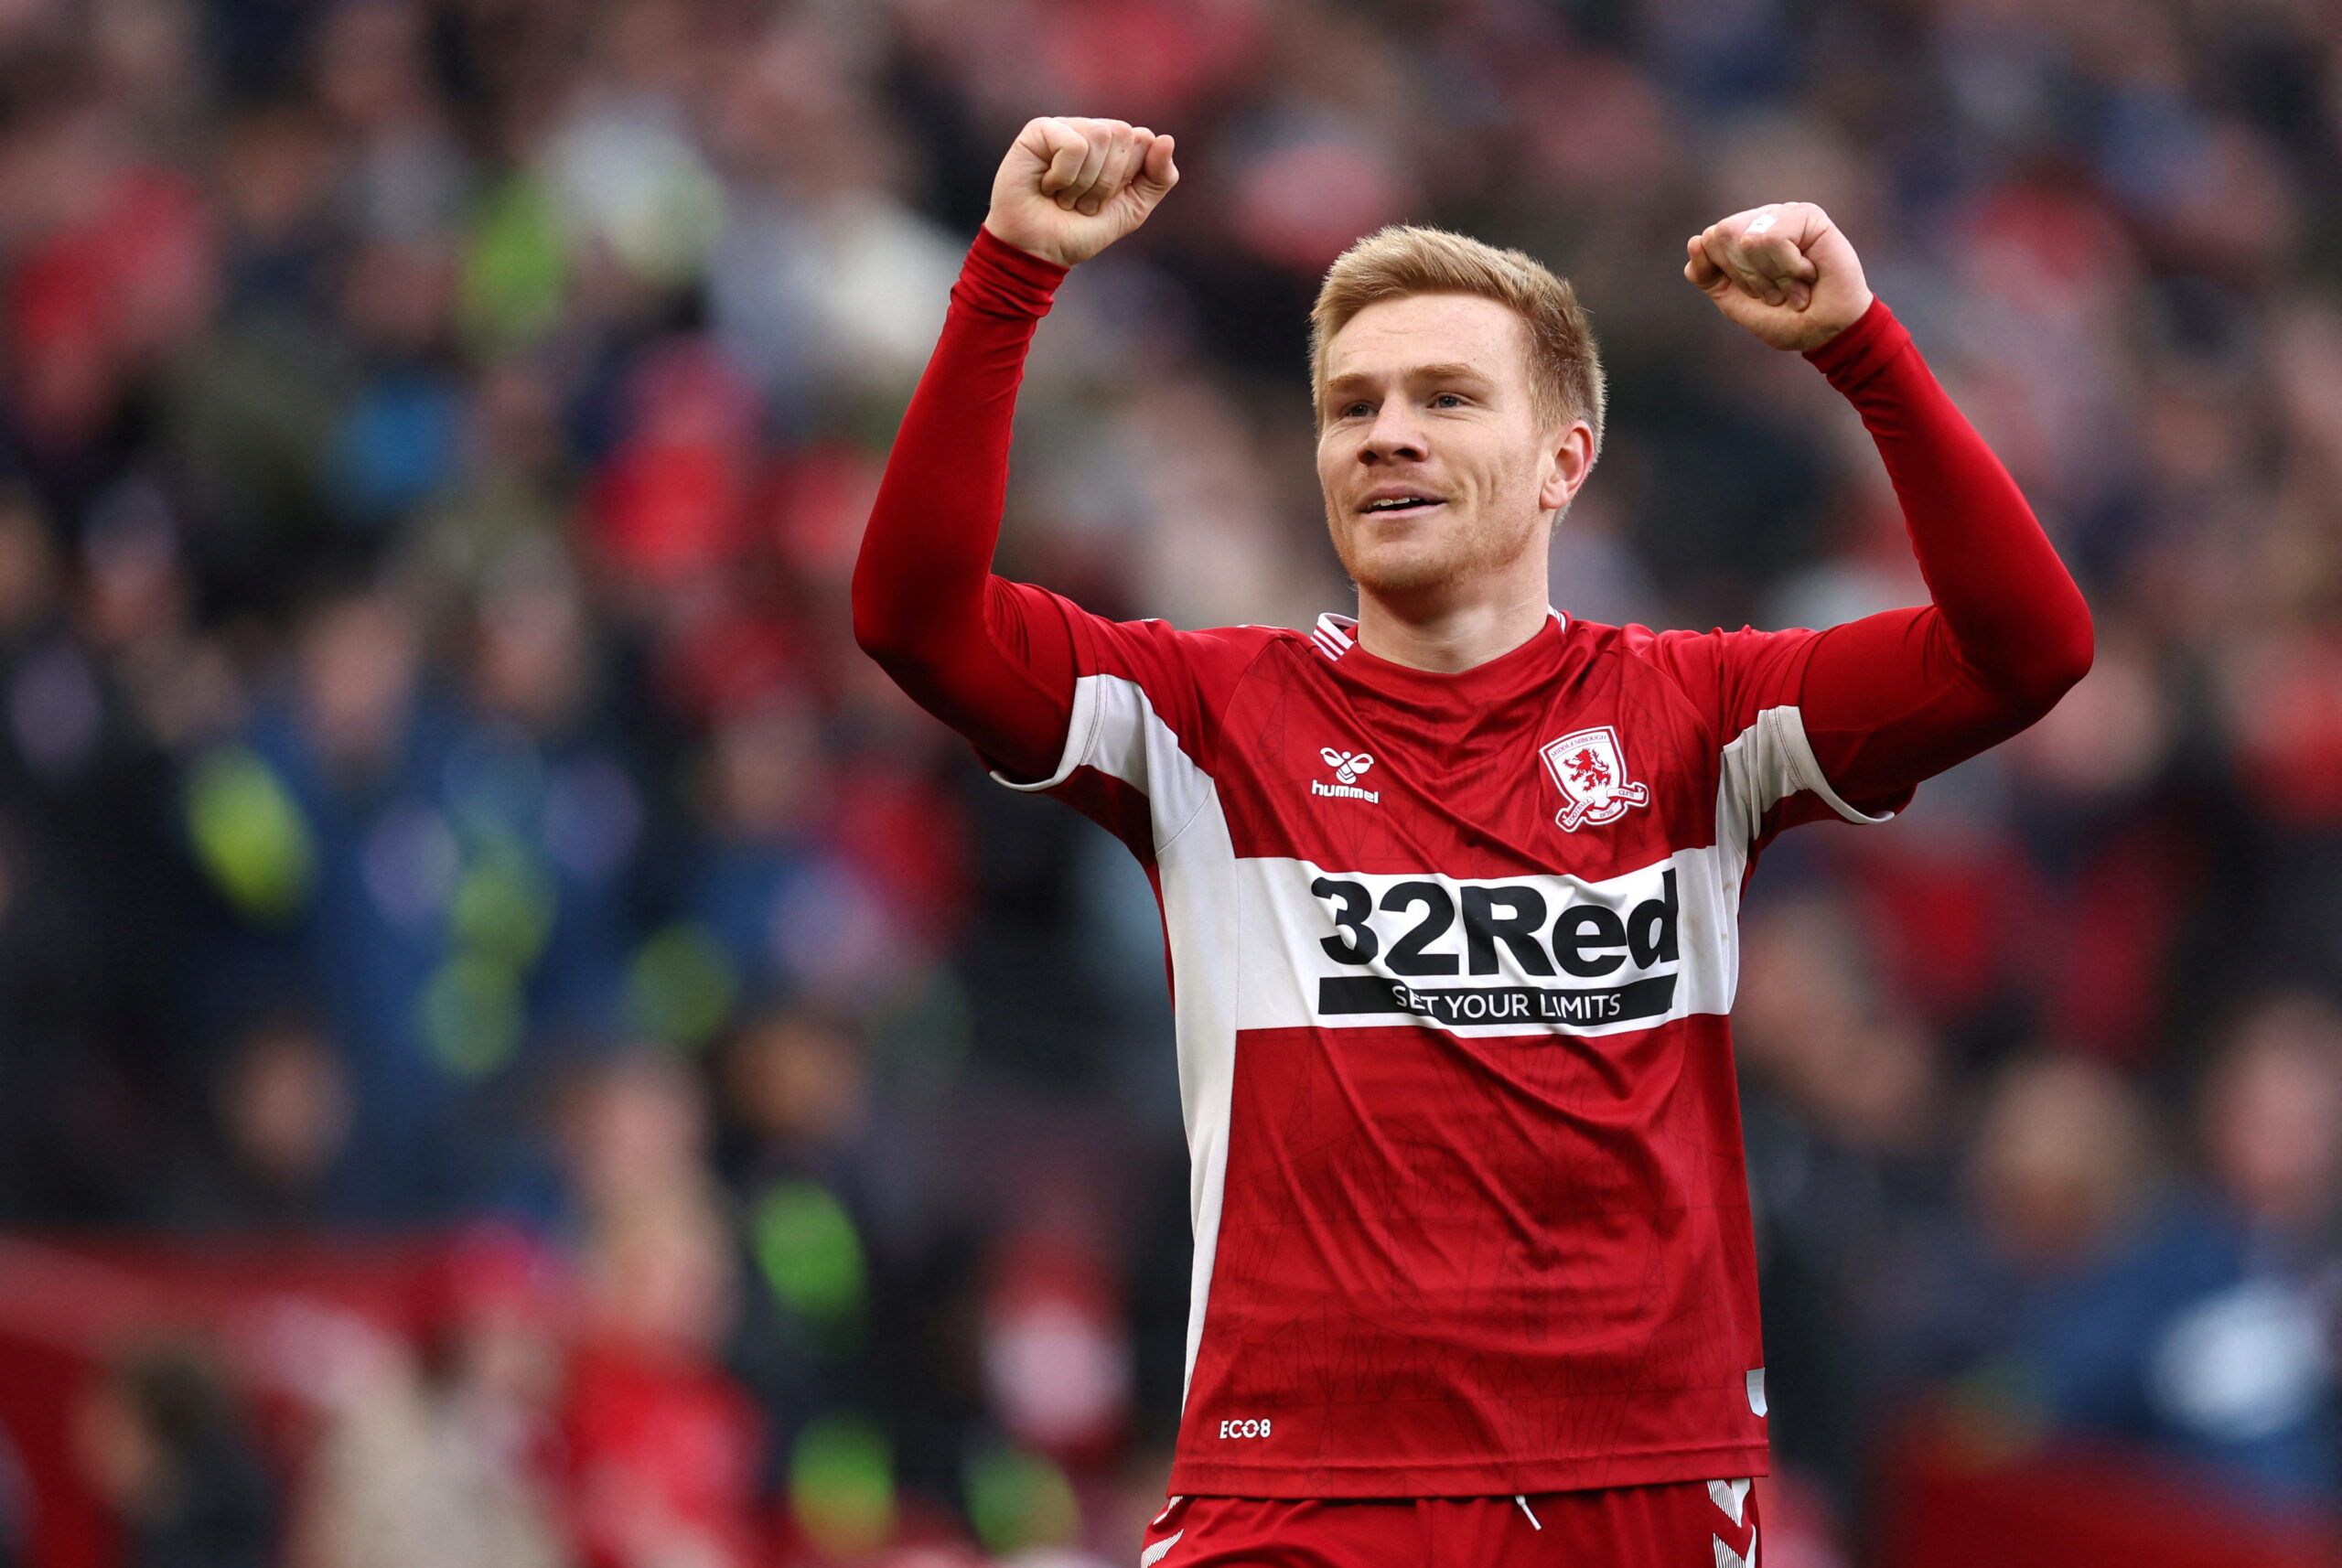 Soccer Football - Championship - Middlesbrough v Luton Town - Riverside Stadium, Middlesbrough, Britain - March 5, 2022  Middlesbrough's Duncan Watmore celebrates scoring their second goal  Action Images/John Clifton  EDITORIAL USE ONLY. No use with unauthorized audio, video, data, fixture lists, club/league logos or 